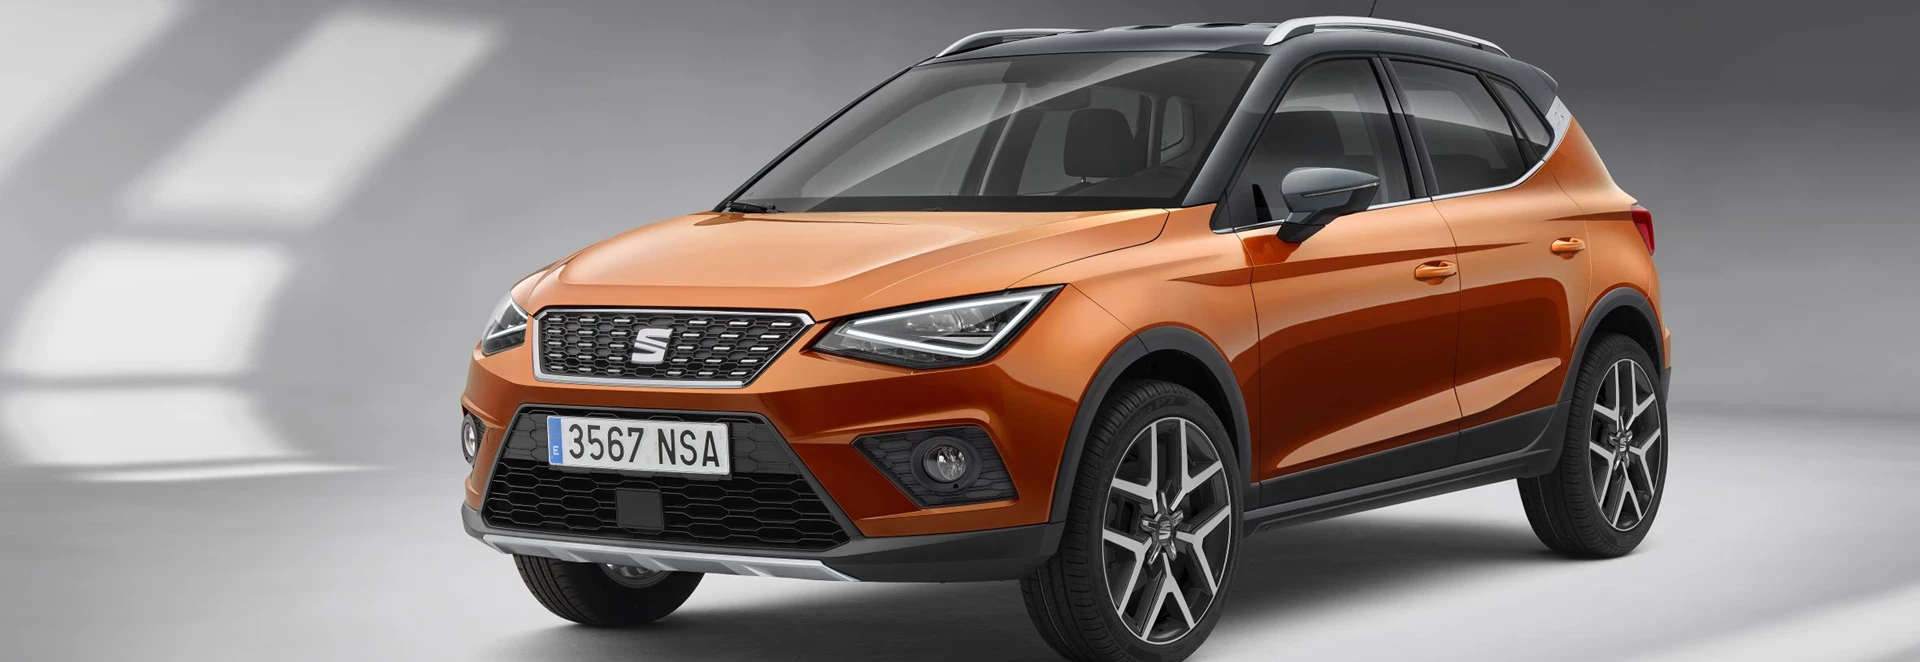 The SEAT Arona compact SUV is here 